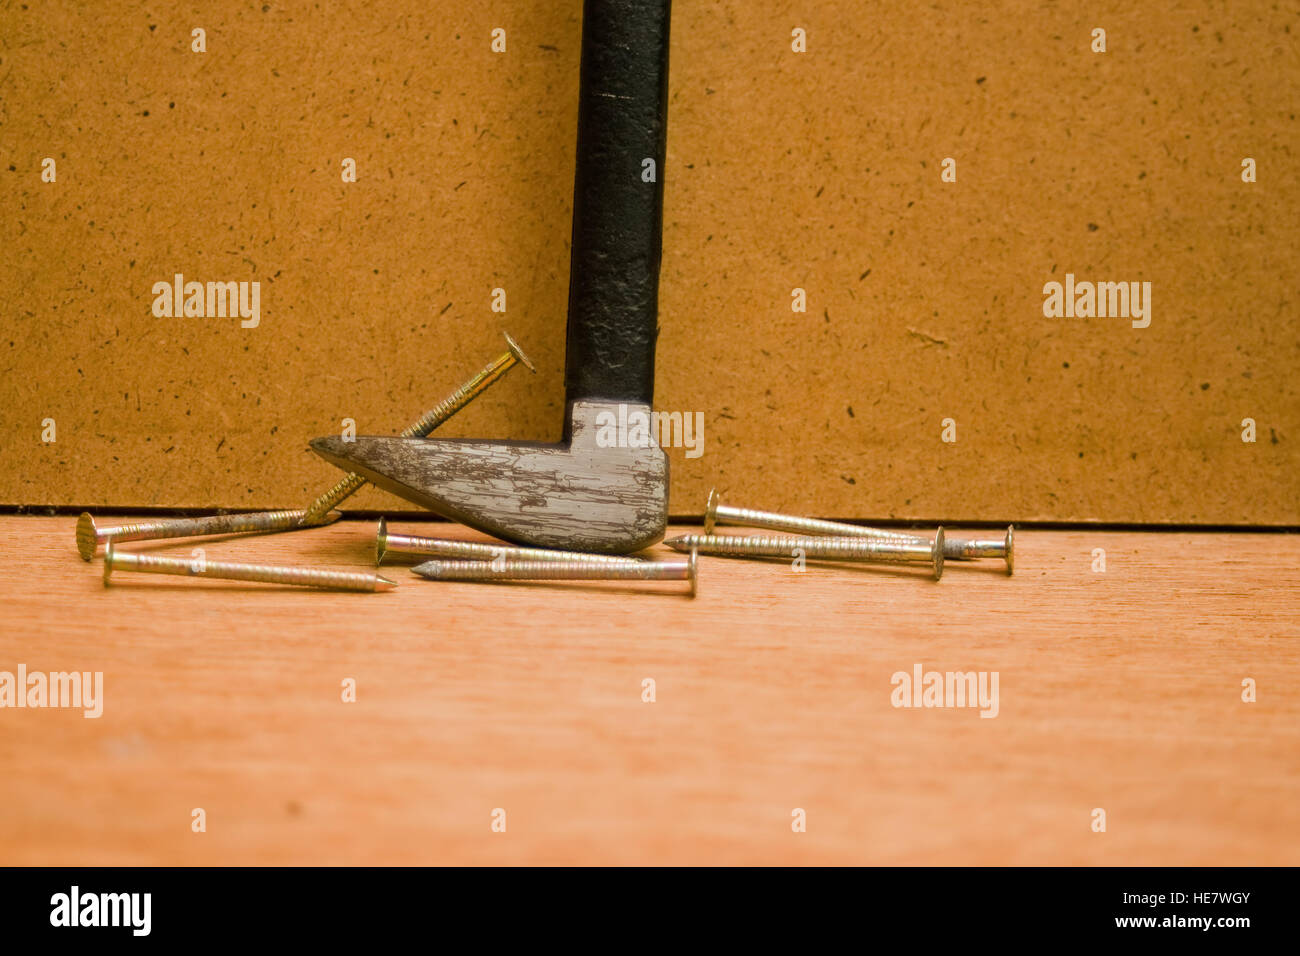 Nail removing hand tool with nails. Stock Photo